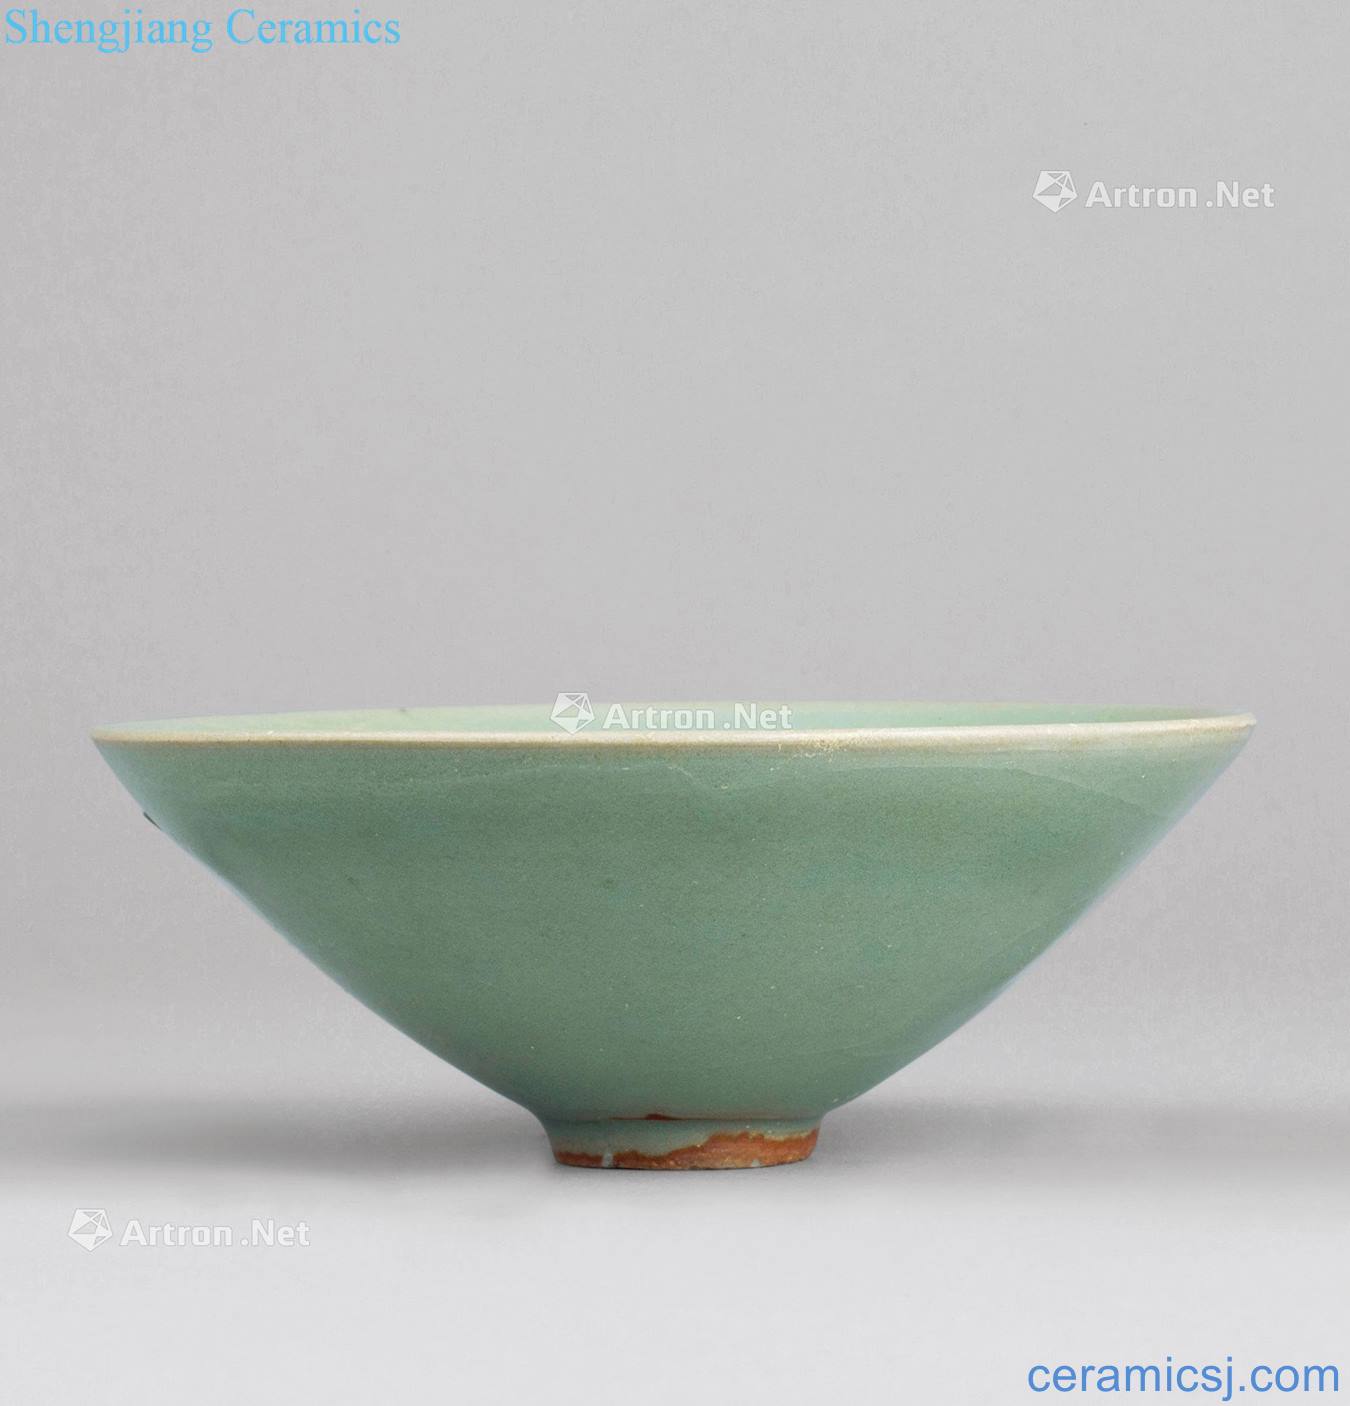 The southern song dynasty Longquan celadon bowl